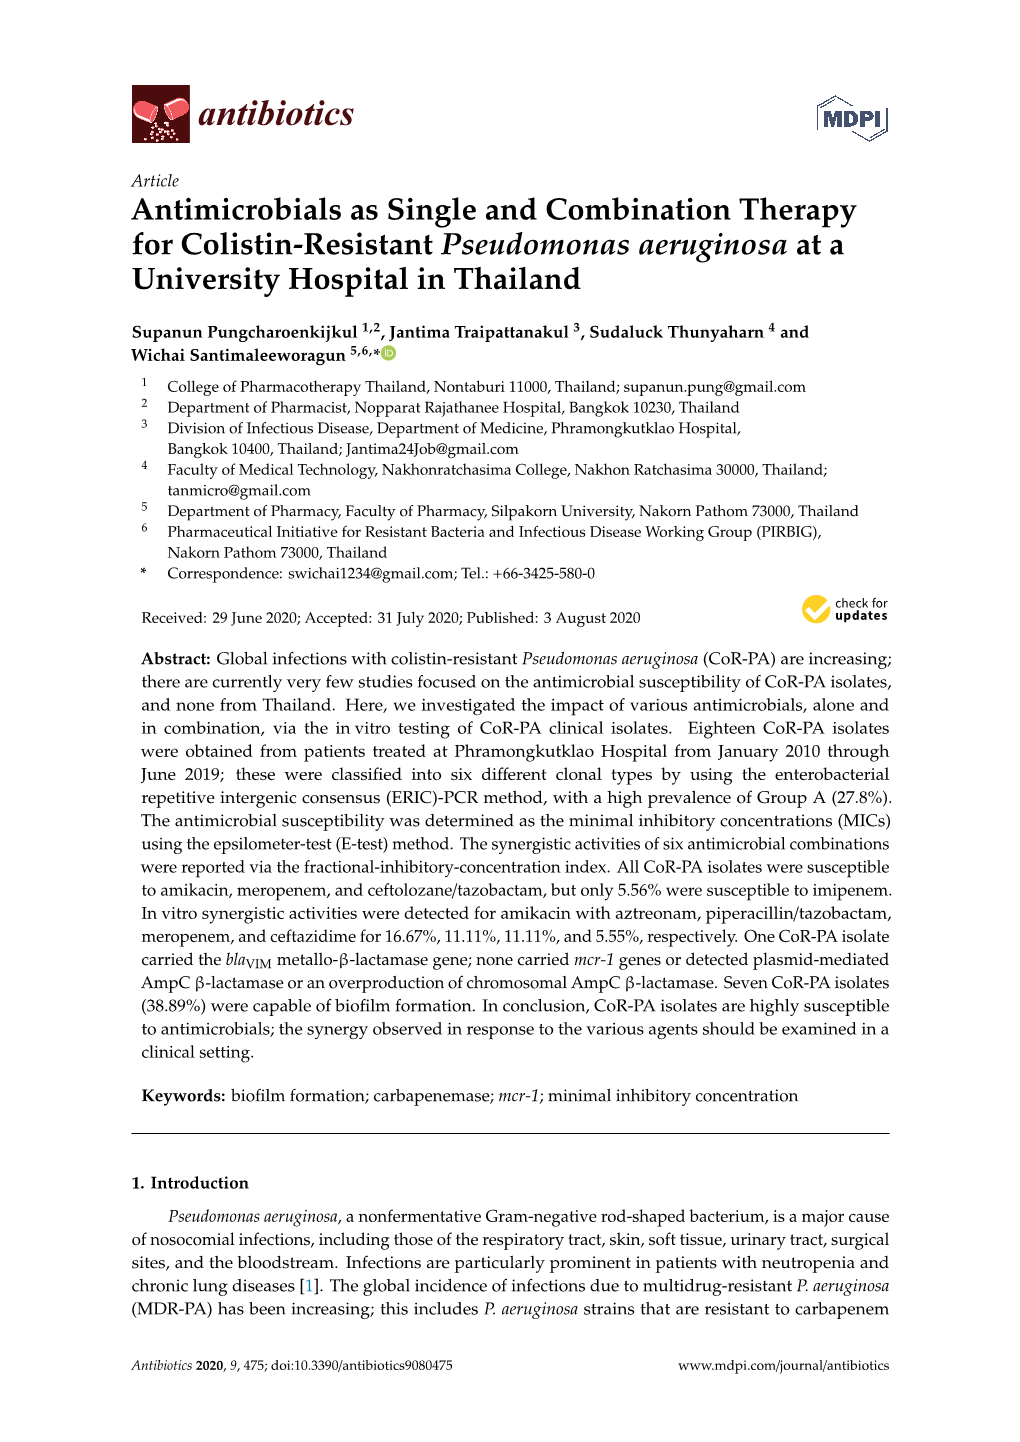 Antimicrobials As Single and Combination Therapy for Colistin-Resistant Pseudomonas Aeruginosa at a University Hospital in Thailand